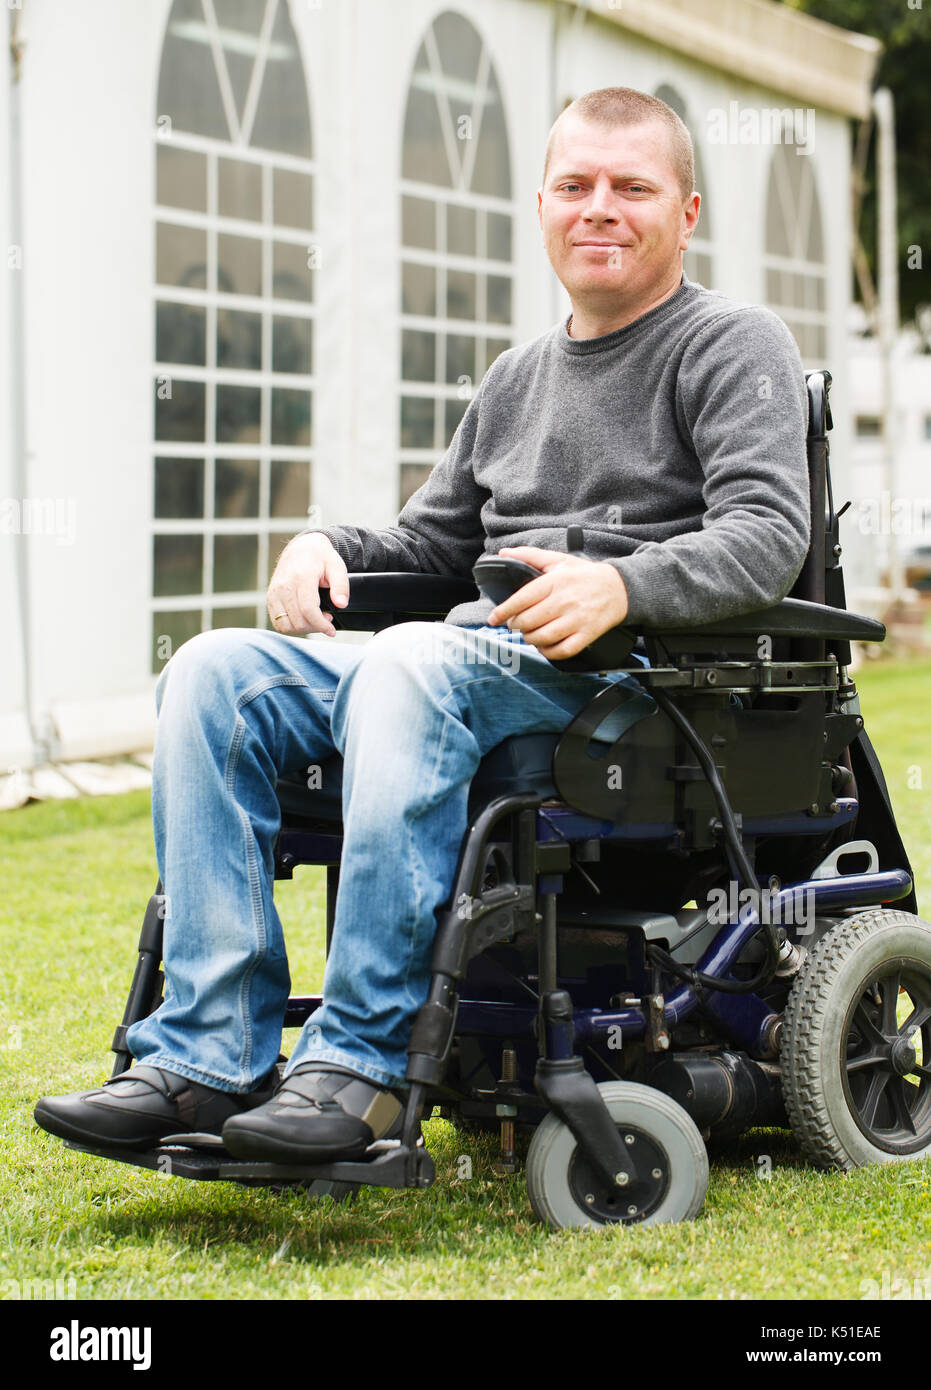 Disabled man smiling in a wheelchair Stock Photo